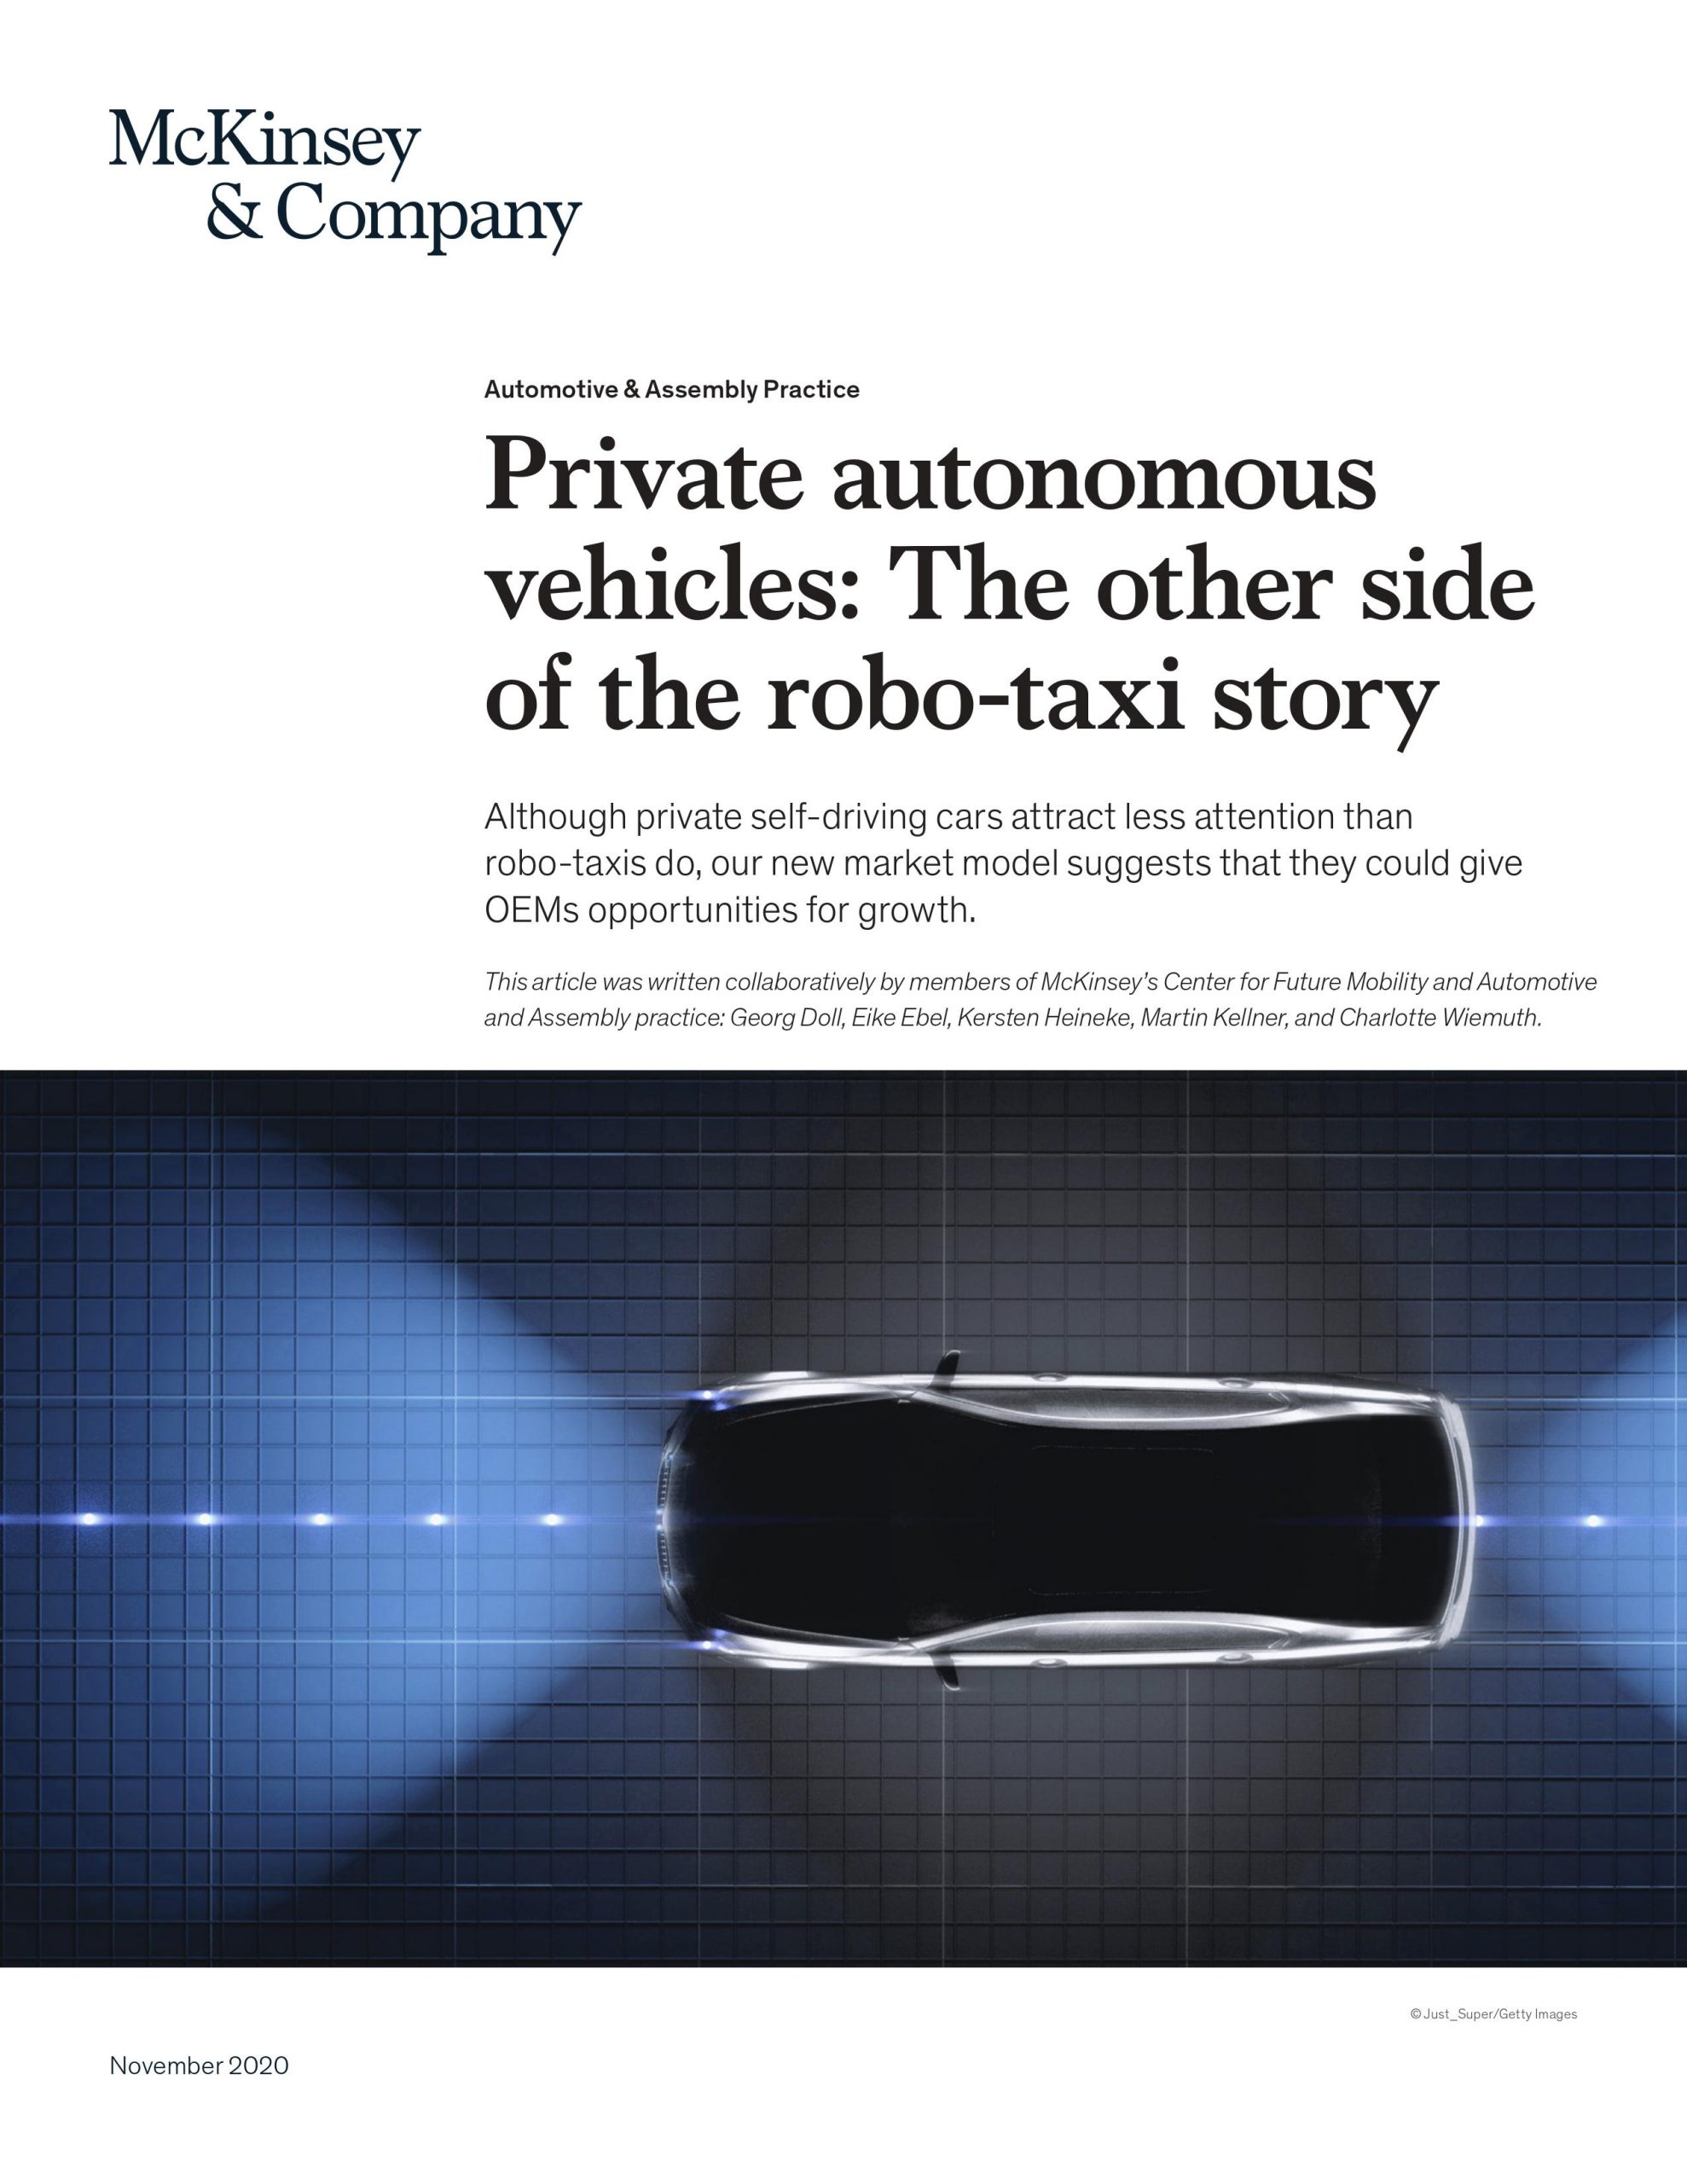 Private autonomous vehicles: The other side of the robo taxi story